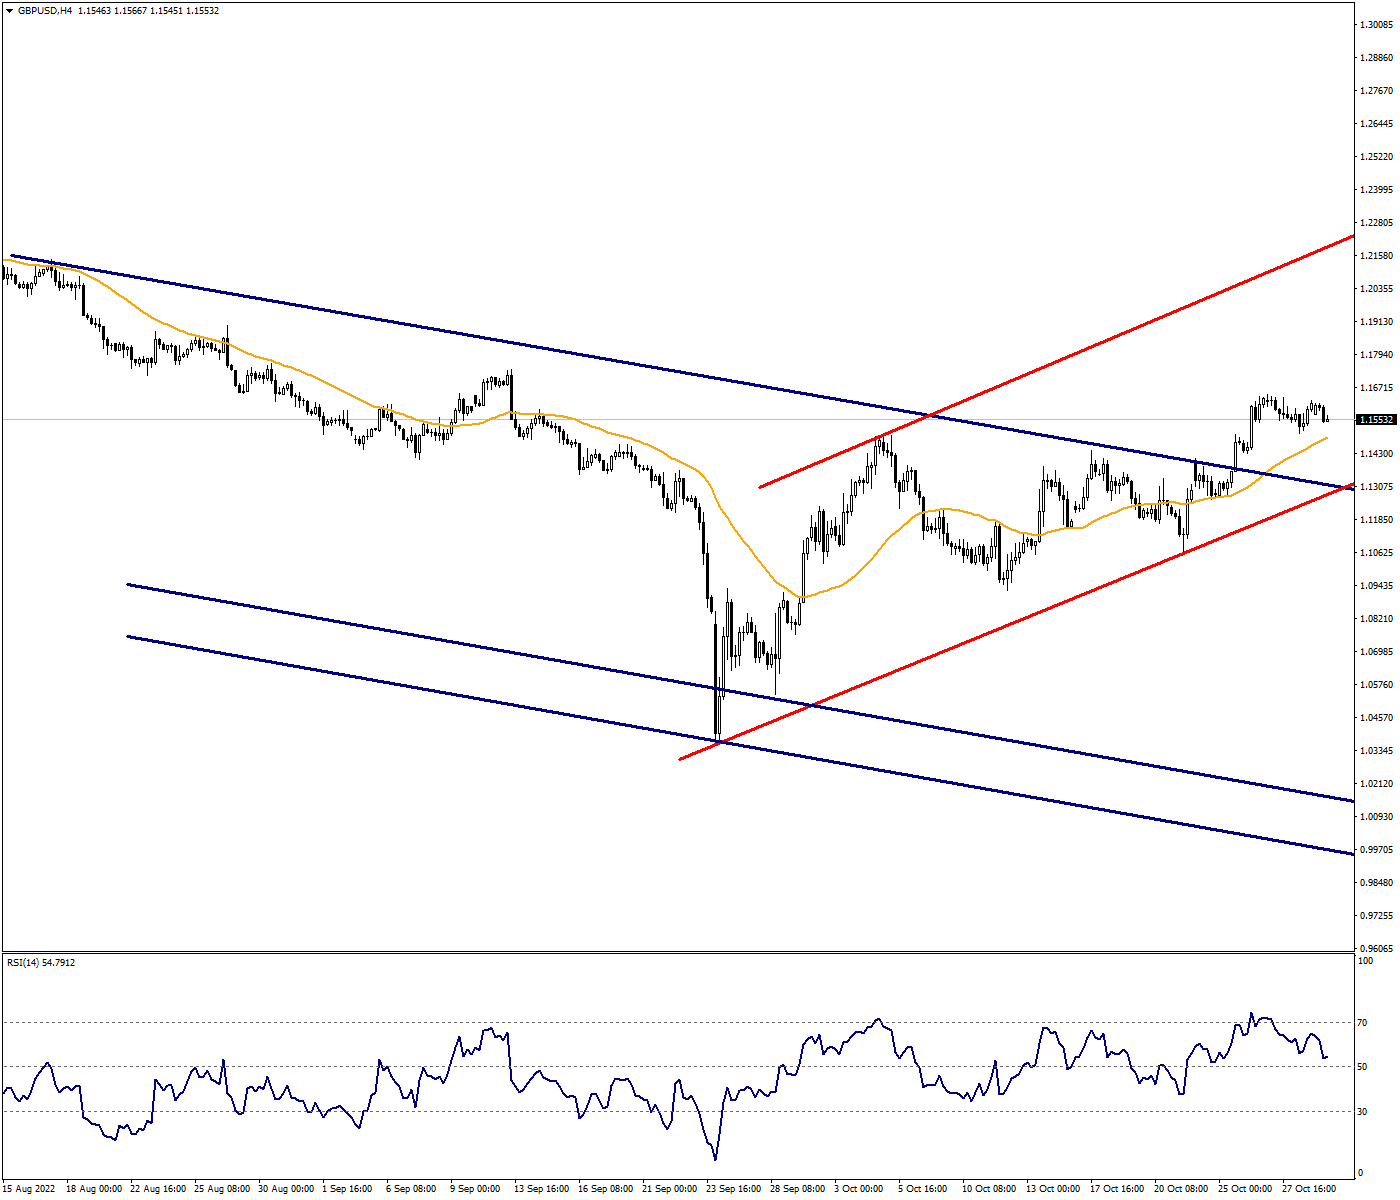 1.1480 Level May Be Determinant in GBPUSD